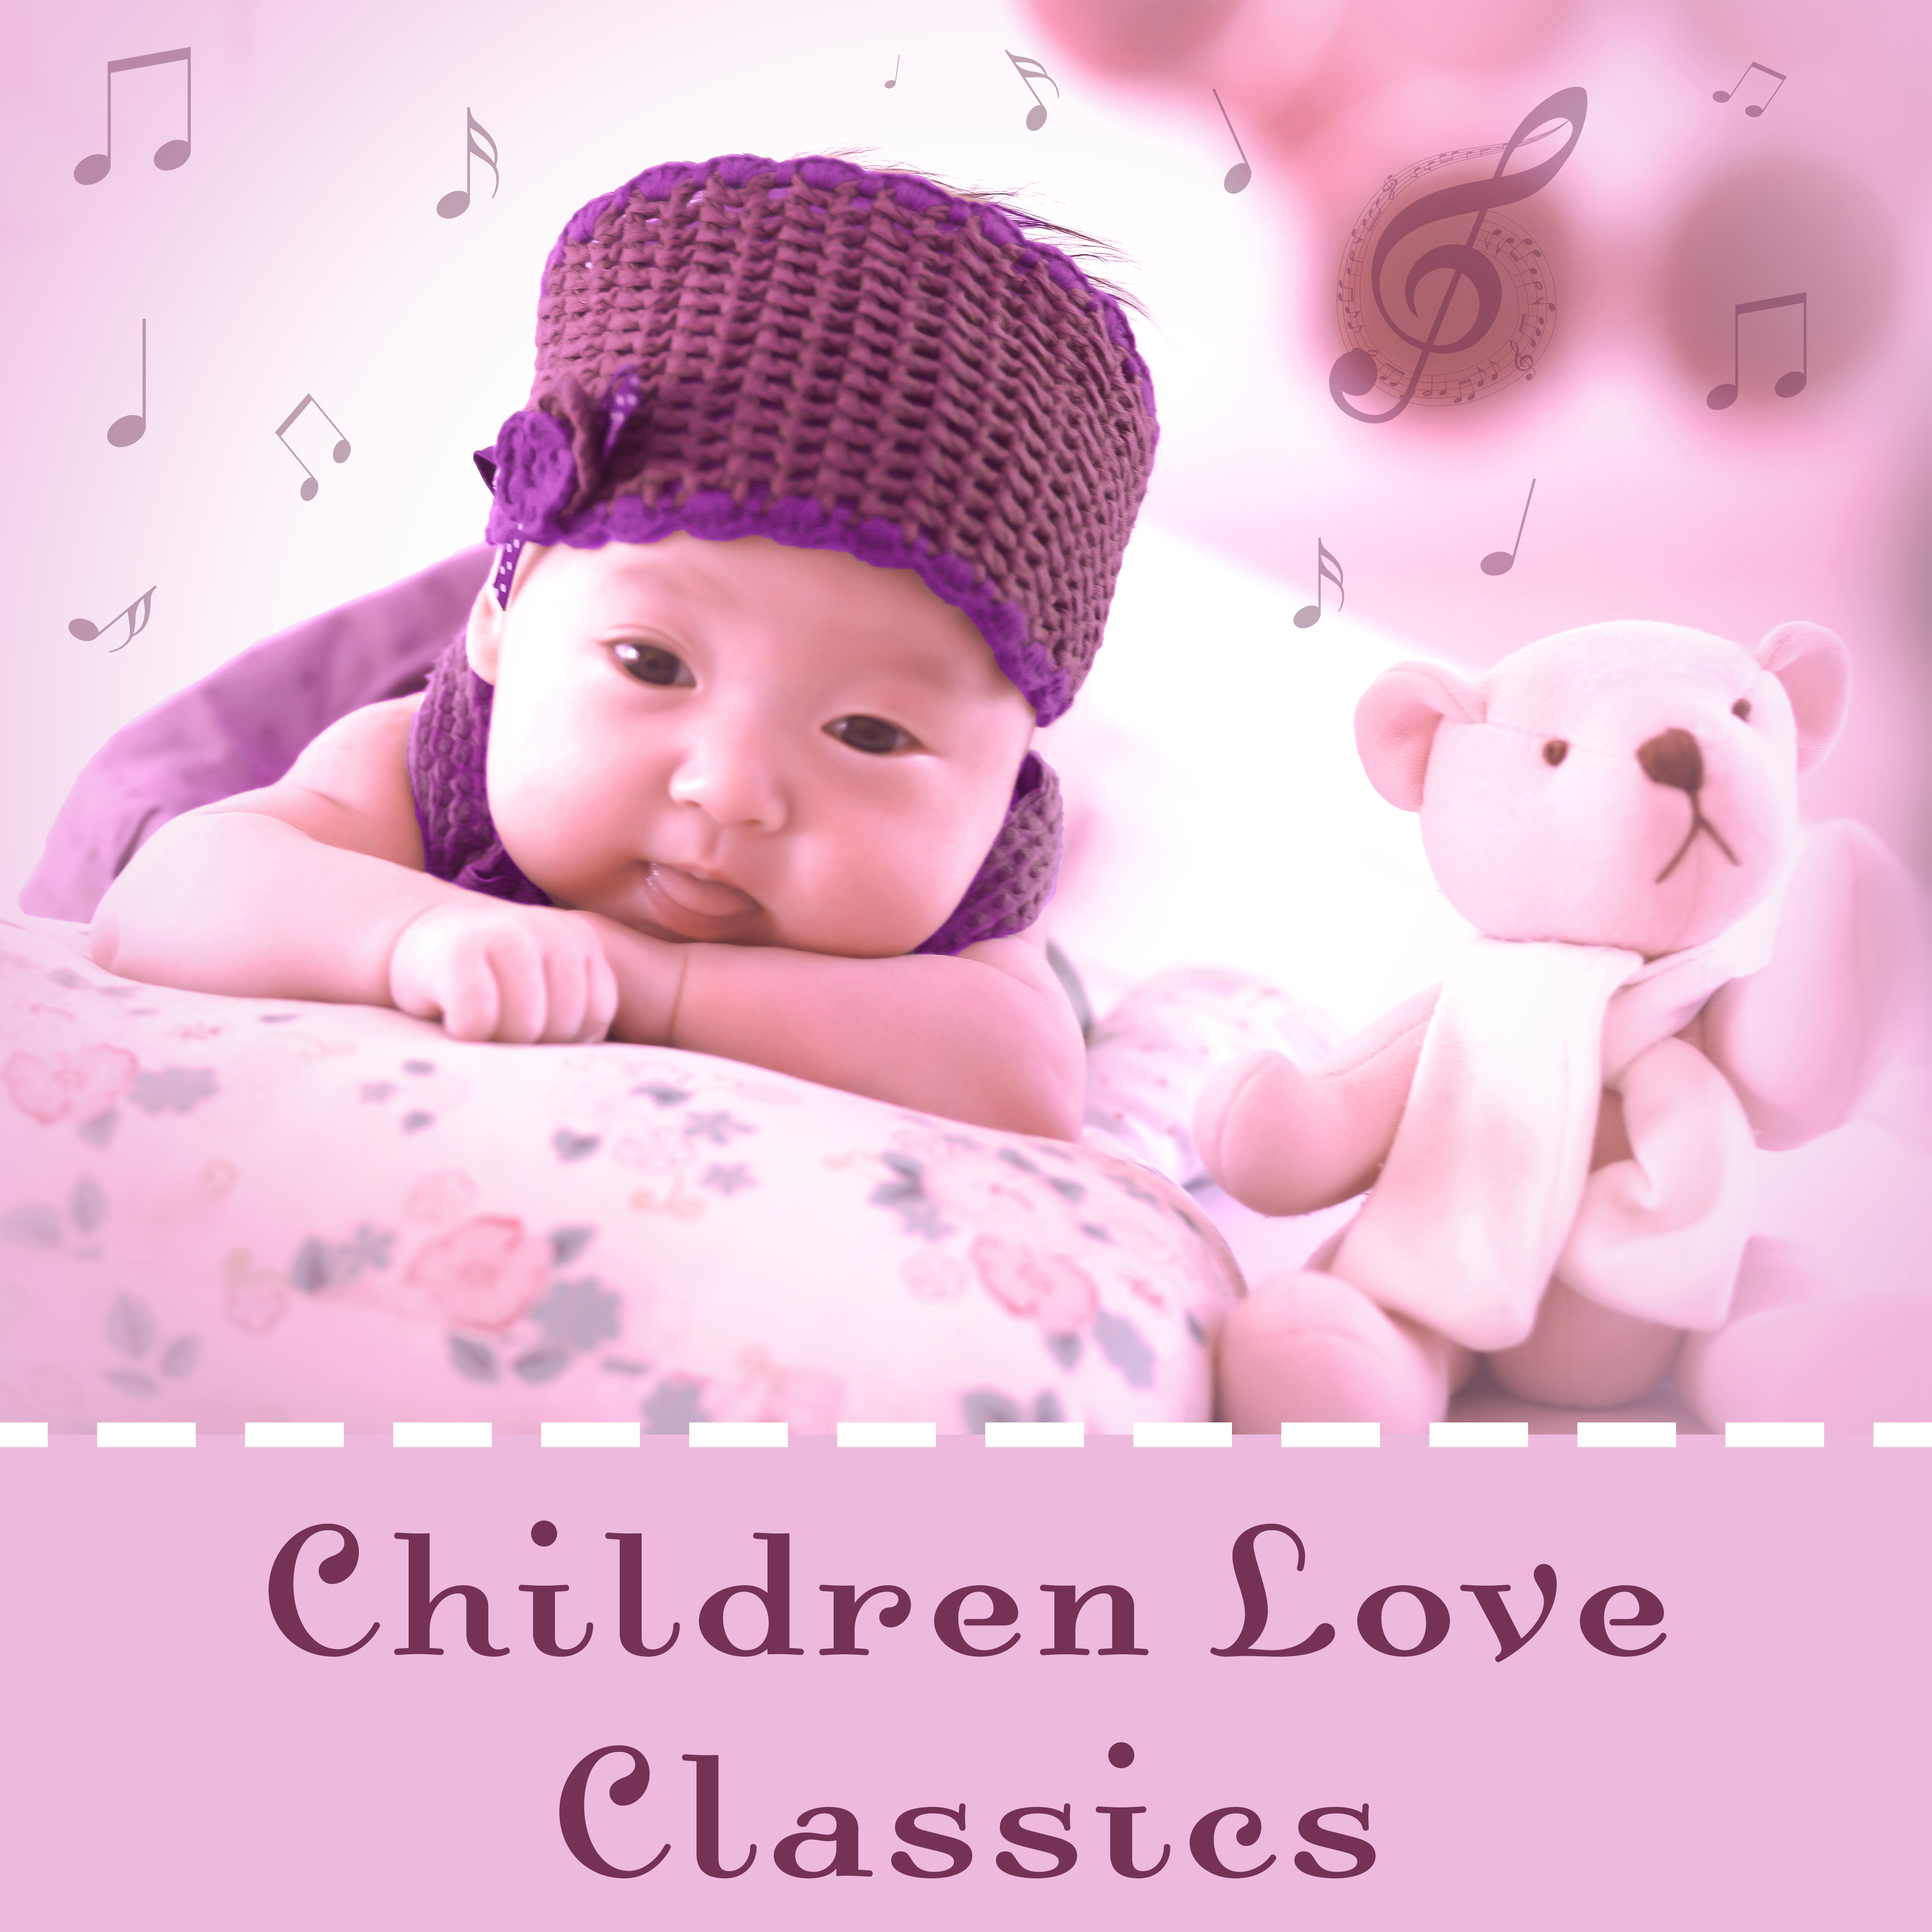 Children Love Classics  Instrumental Music for Baby, Educational Songs, Einstein Effect, Growing Brain, Mozart, Beethoven